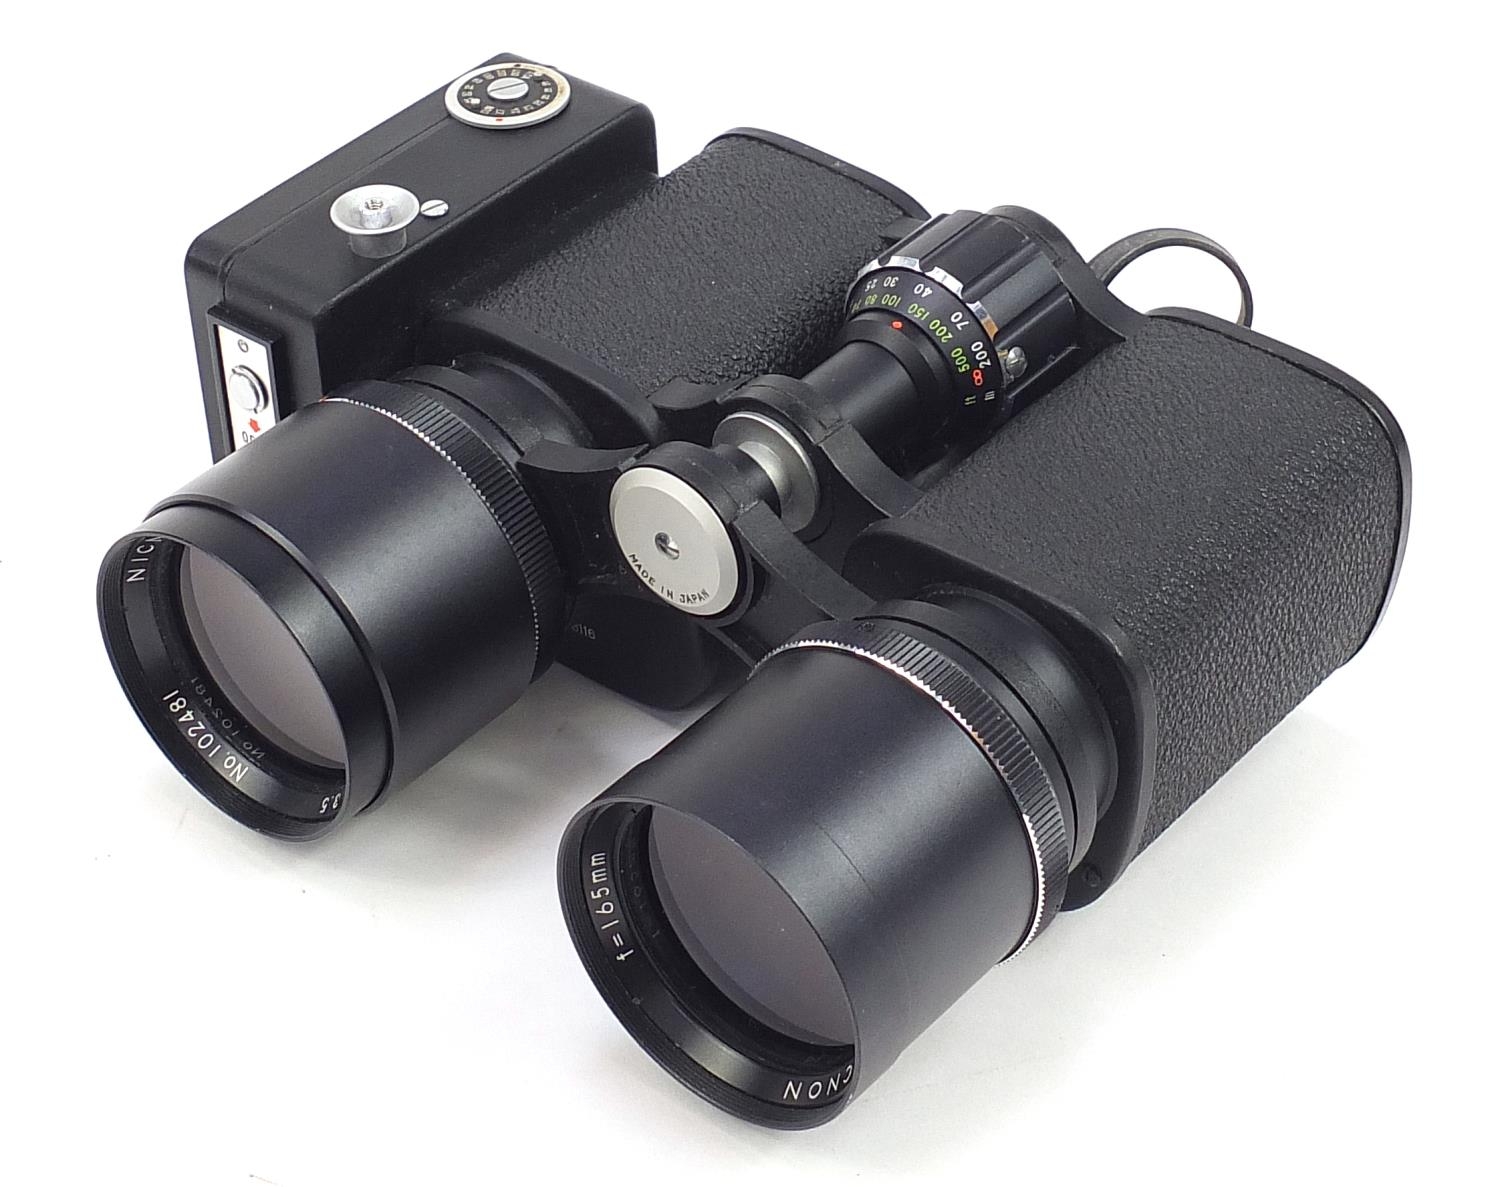 Nicnon TF7X50 combination binoculars and camera with protective case - Image 2 of 4